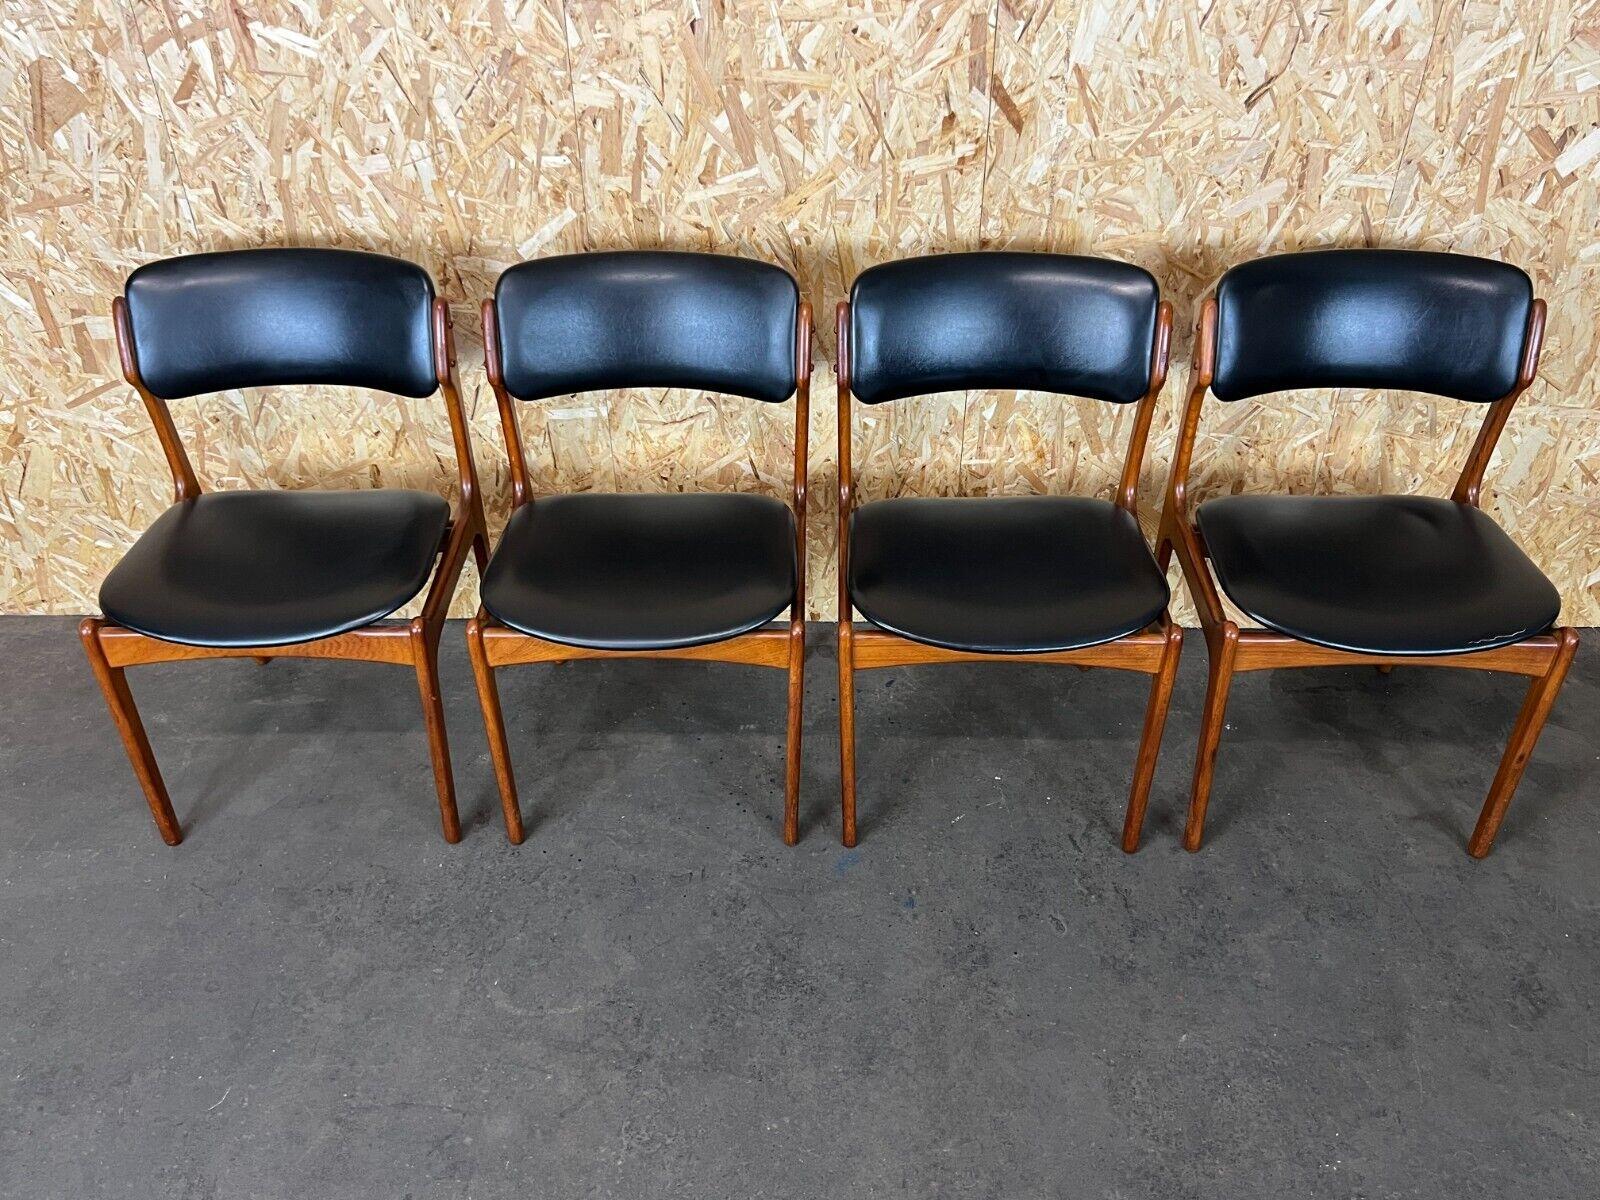 60s dining chairs